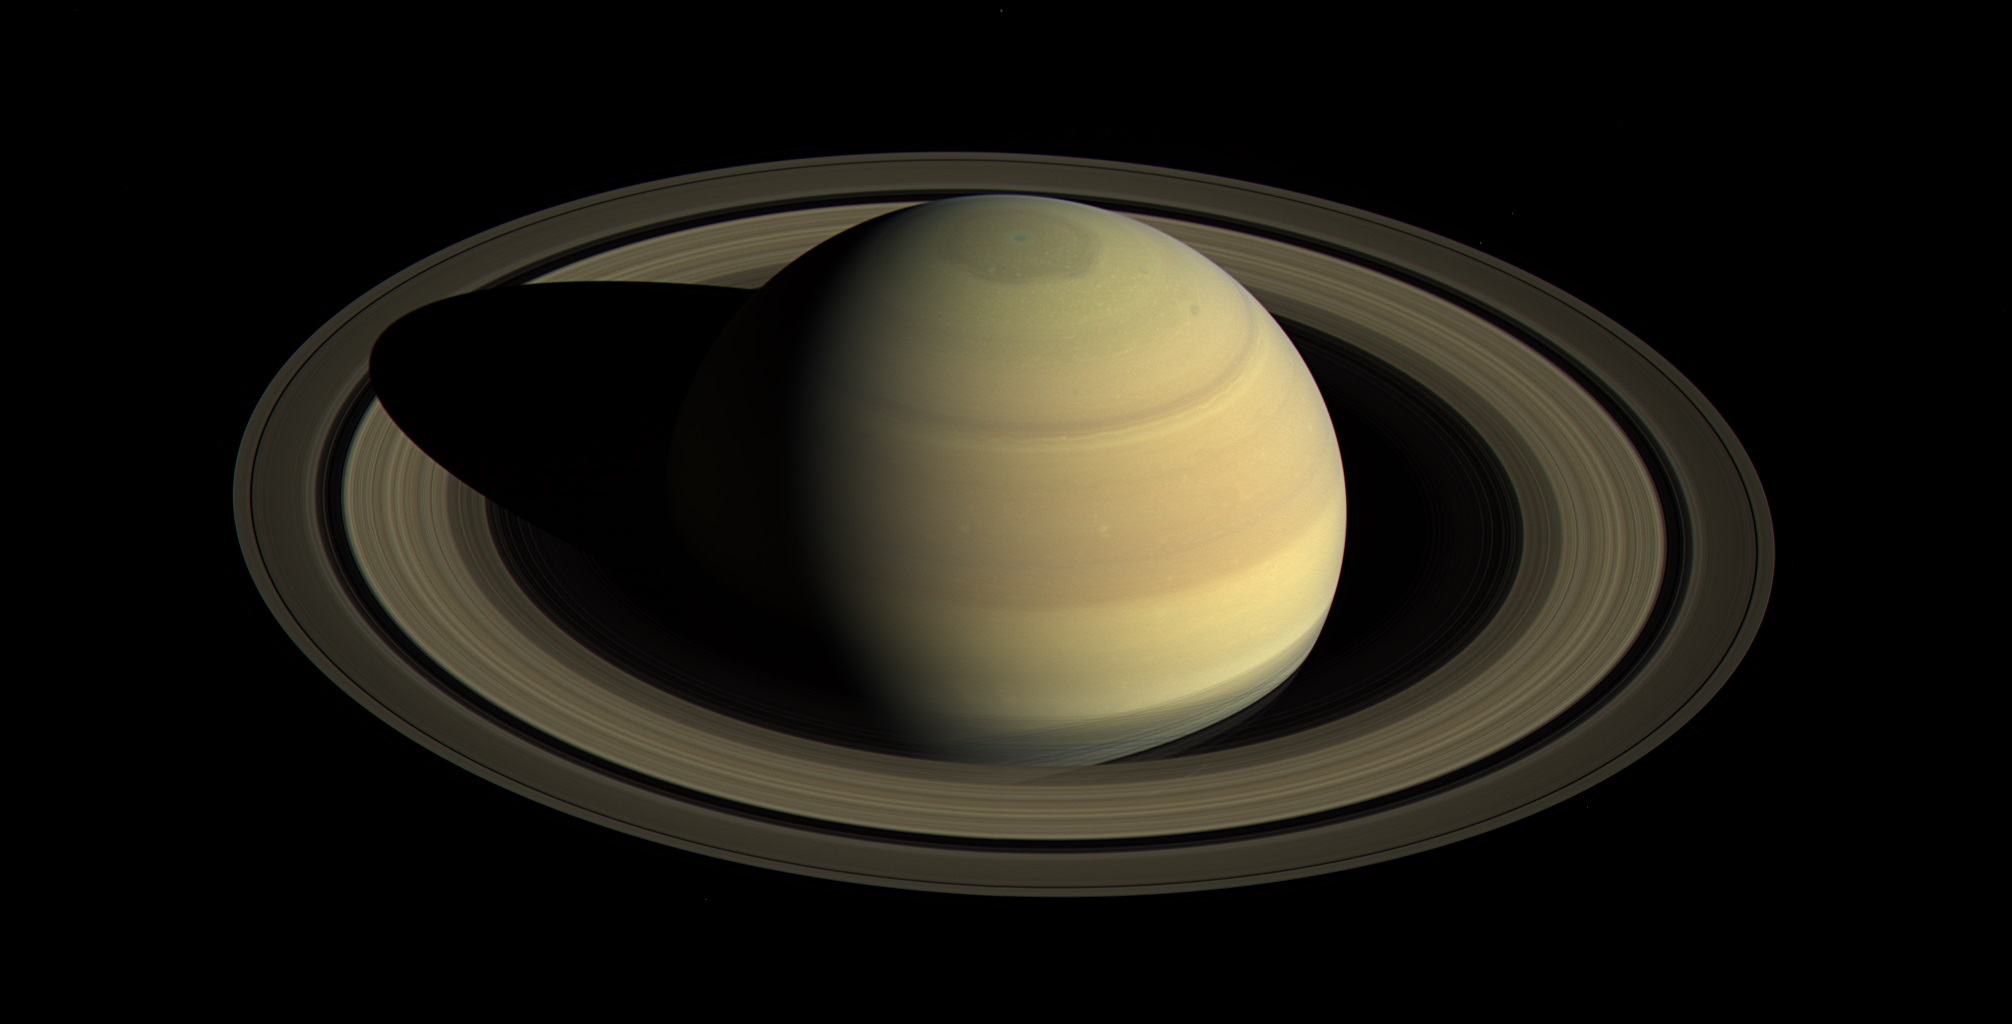 Saturn image is courtesy of NASA/JPL-Caltech/Space Science Institute.